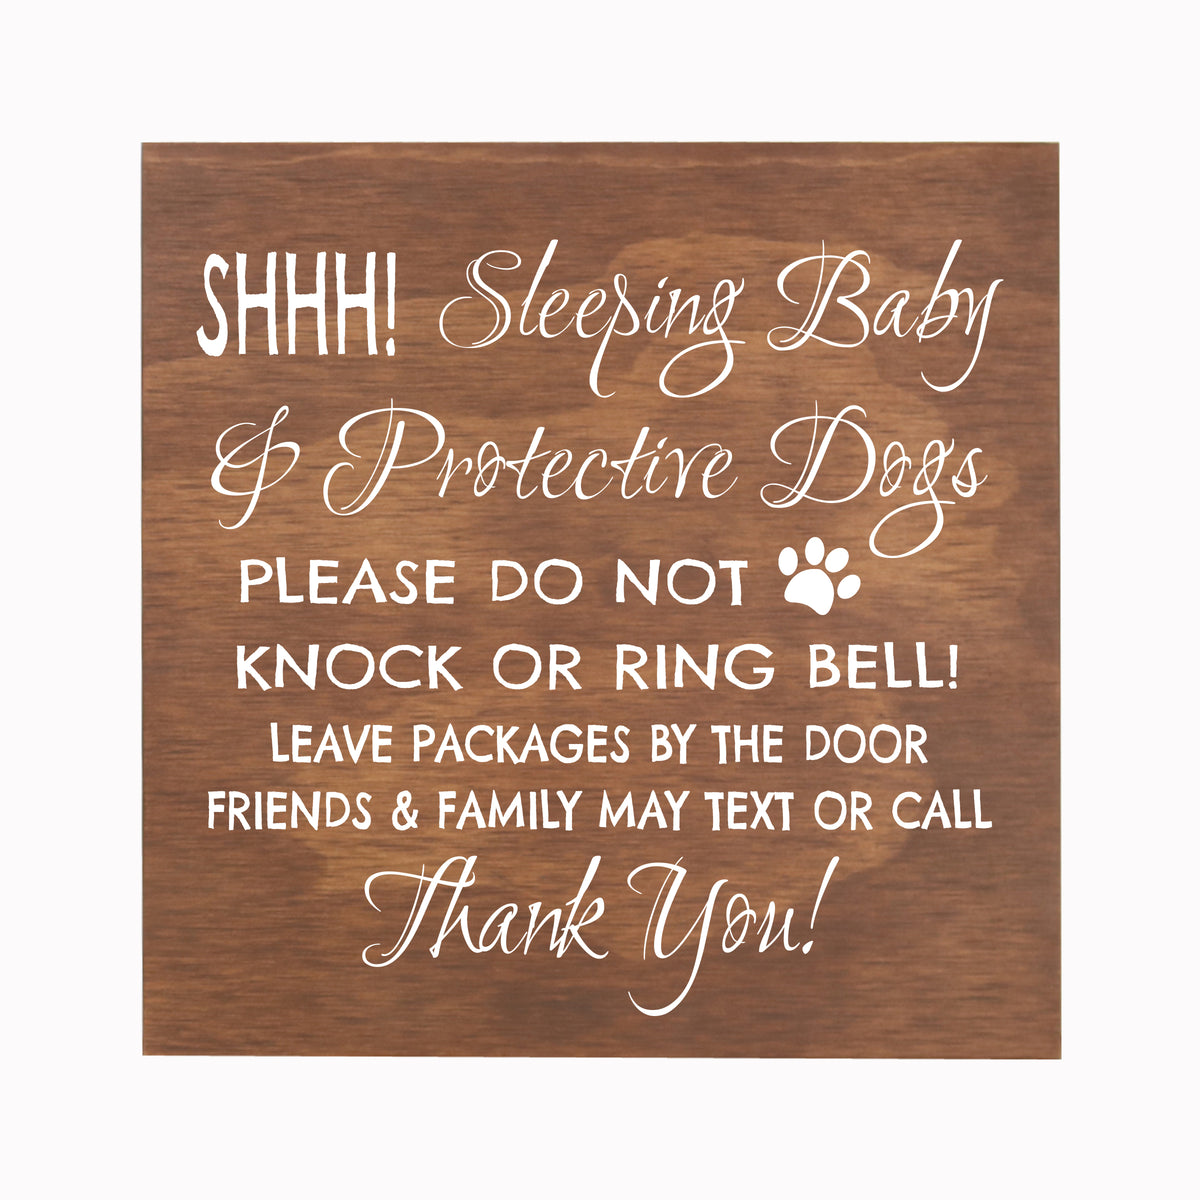 LifeSong Milestones Sleeping Baby Protective Puppies Baltic Birch Hanging Sign for Front Door - Do Not Knock or Ring Doorbell - Quiet Entry for House New Home Decor - 10x10